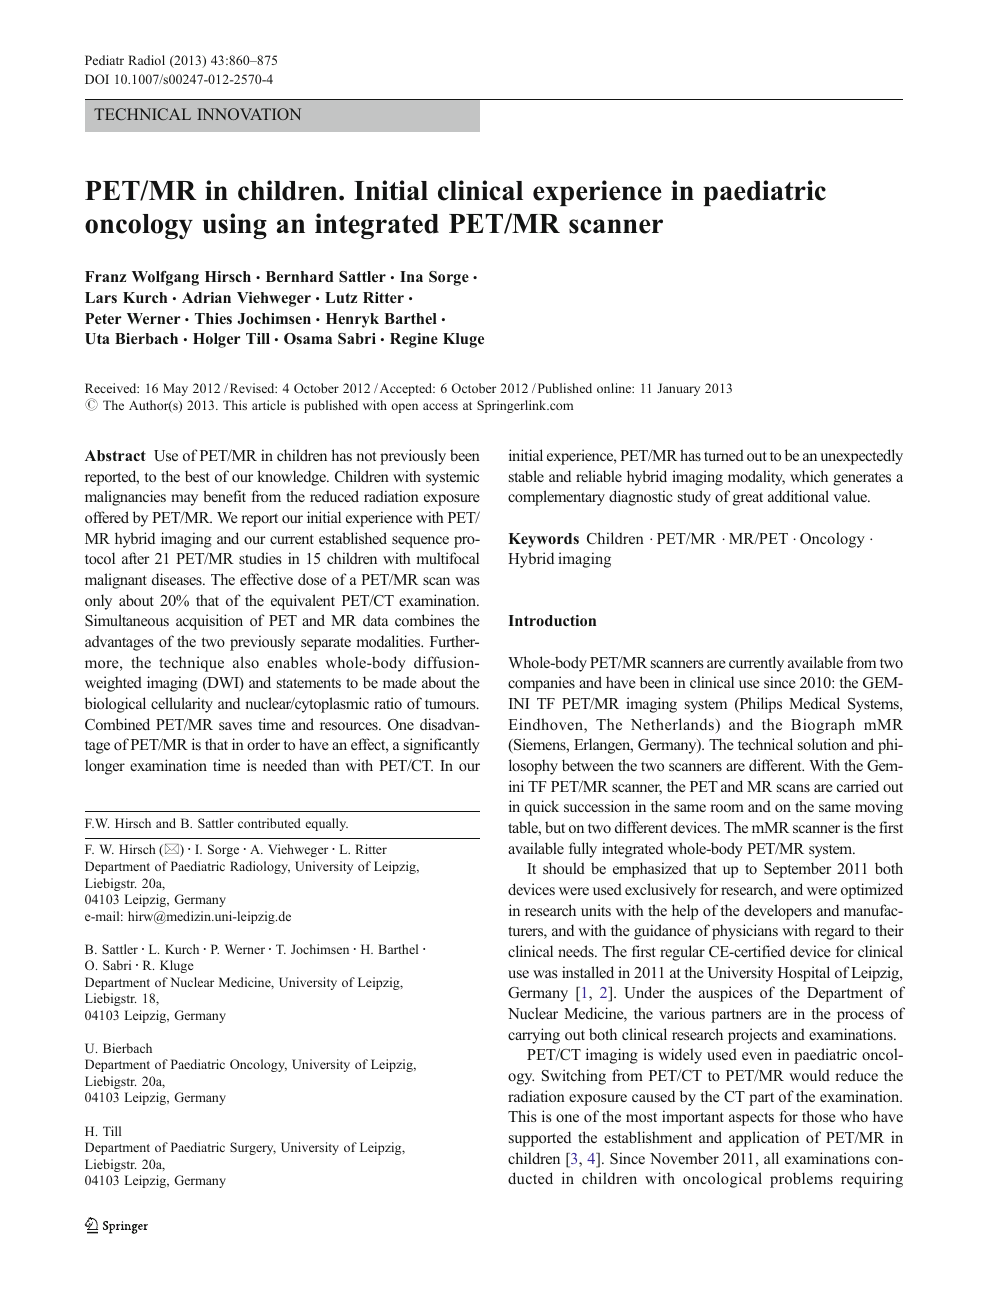 Pet Mr In Children Initial Clinical Experience In Paediatric Oncology Using An Integrated Pet Mr Scanner Topic Of Research Paper In Clinical Medicine Download Scholarly Article Pdf And Read For Free On Cyberleninka